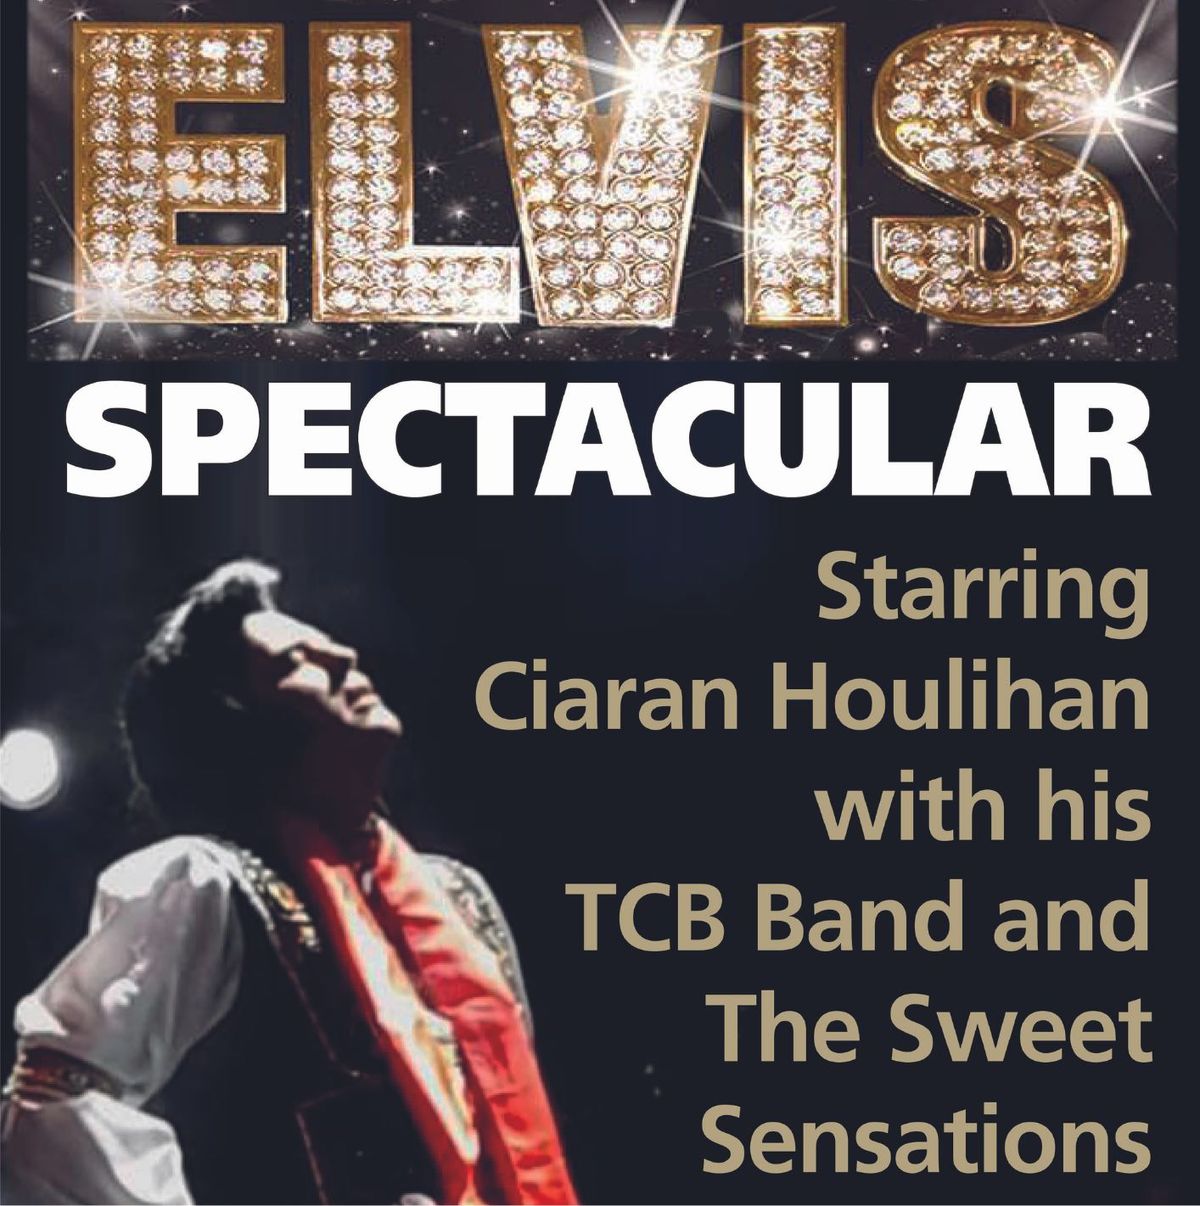 The Elvis Spectacular Show